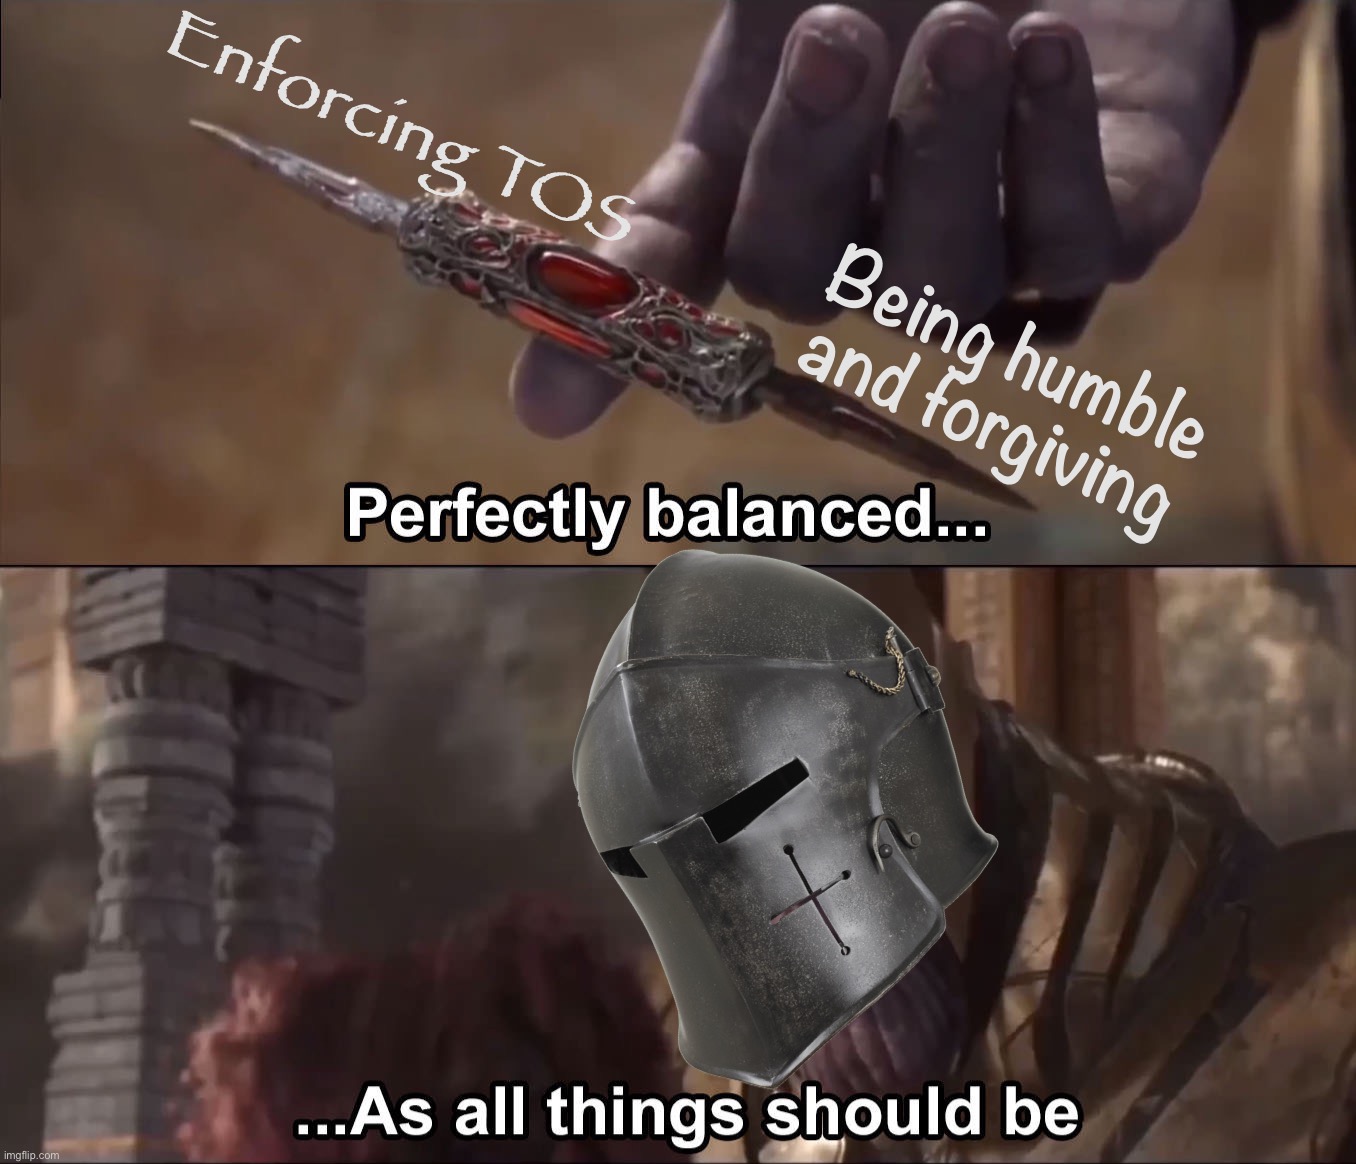 Remember those who violated TOS are people too. Maybe they just didn’t know. | Enforcing TOS; Being humble and forgiving | image tagged in crusader perfectly balanced as all things should be,terms and conditions,tos,imgflip community,imgflip users,crusader | made w/ Imgflip meme maker